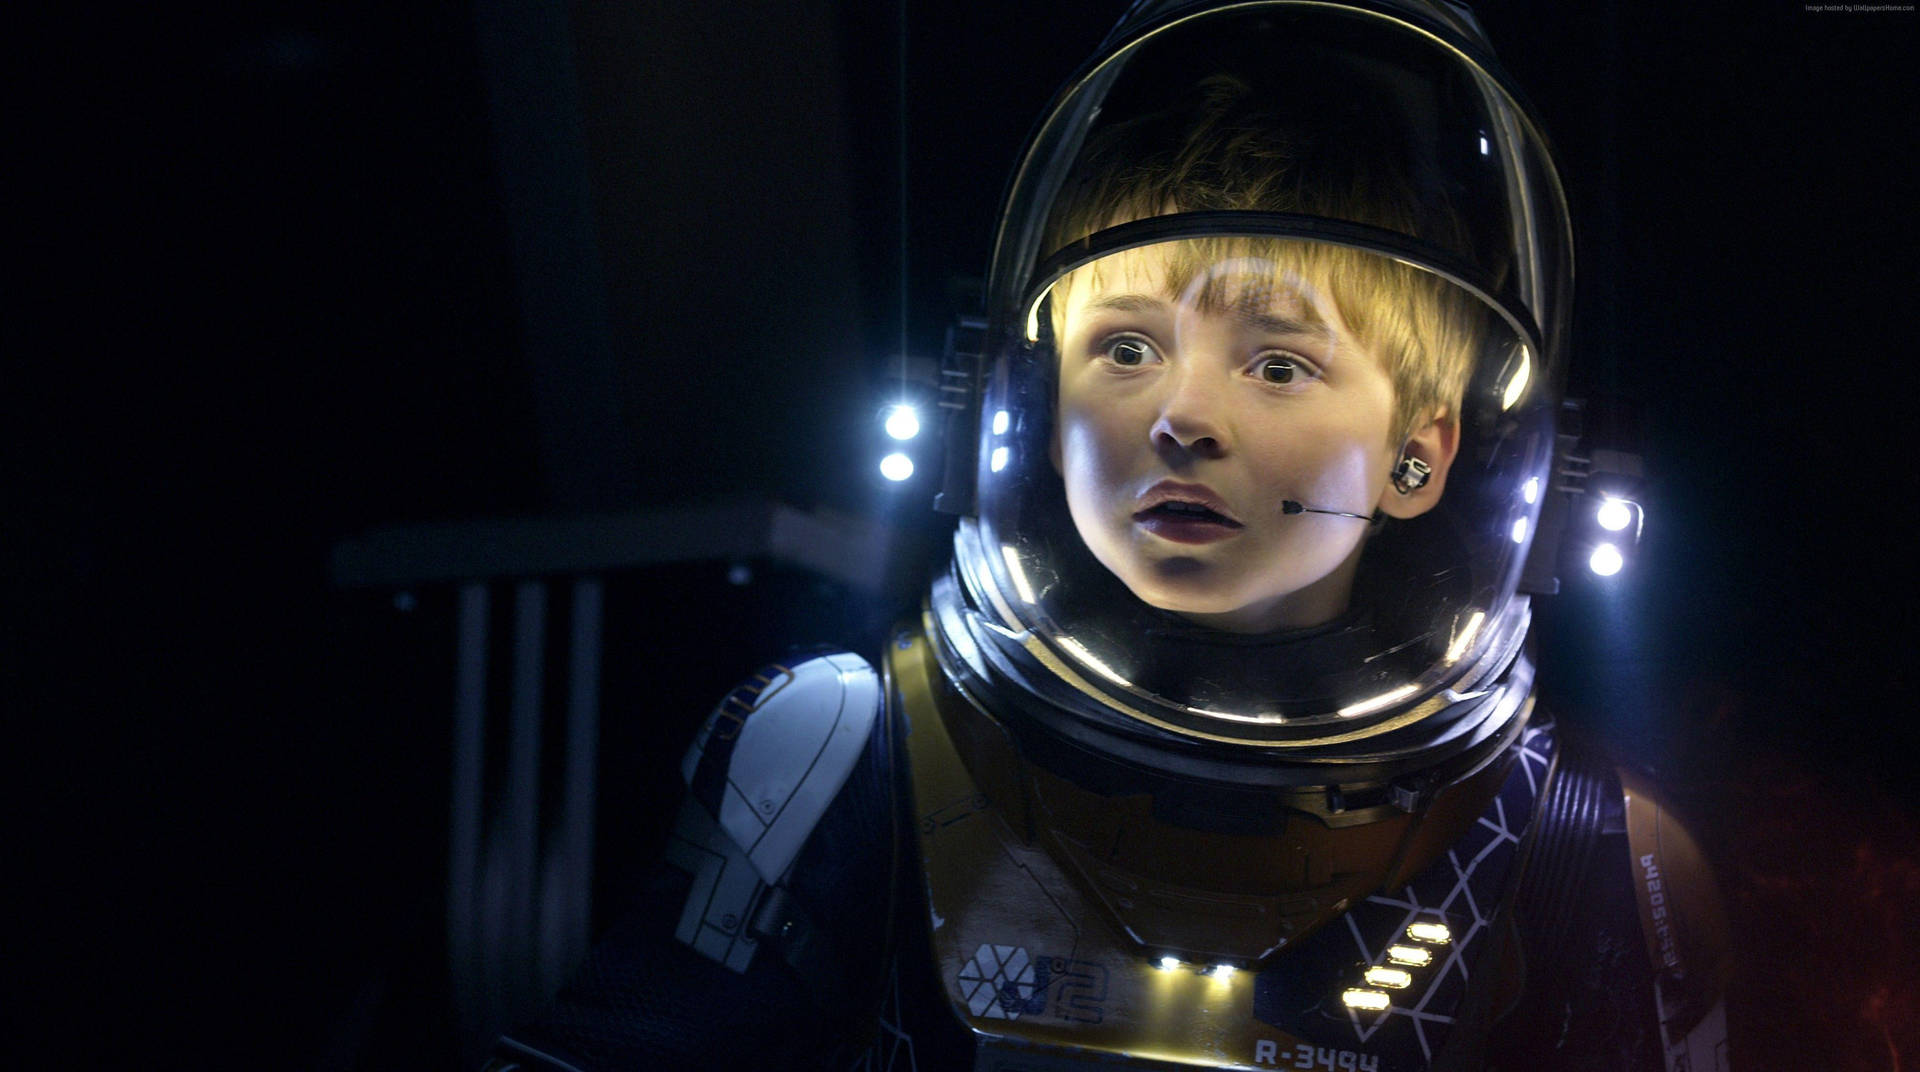 A Young Boy In Lost In Space Wallpaper